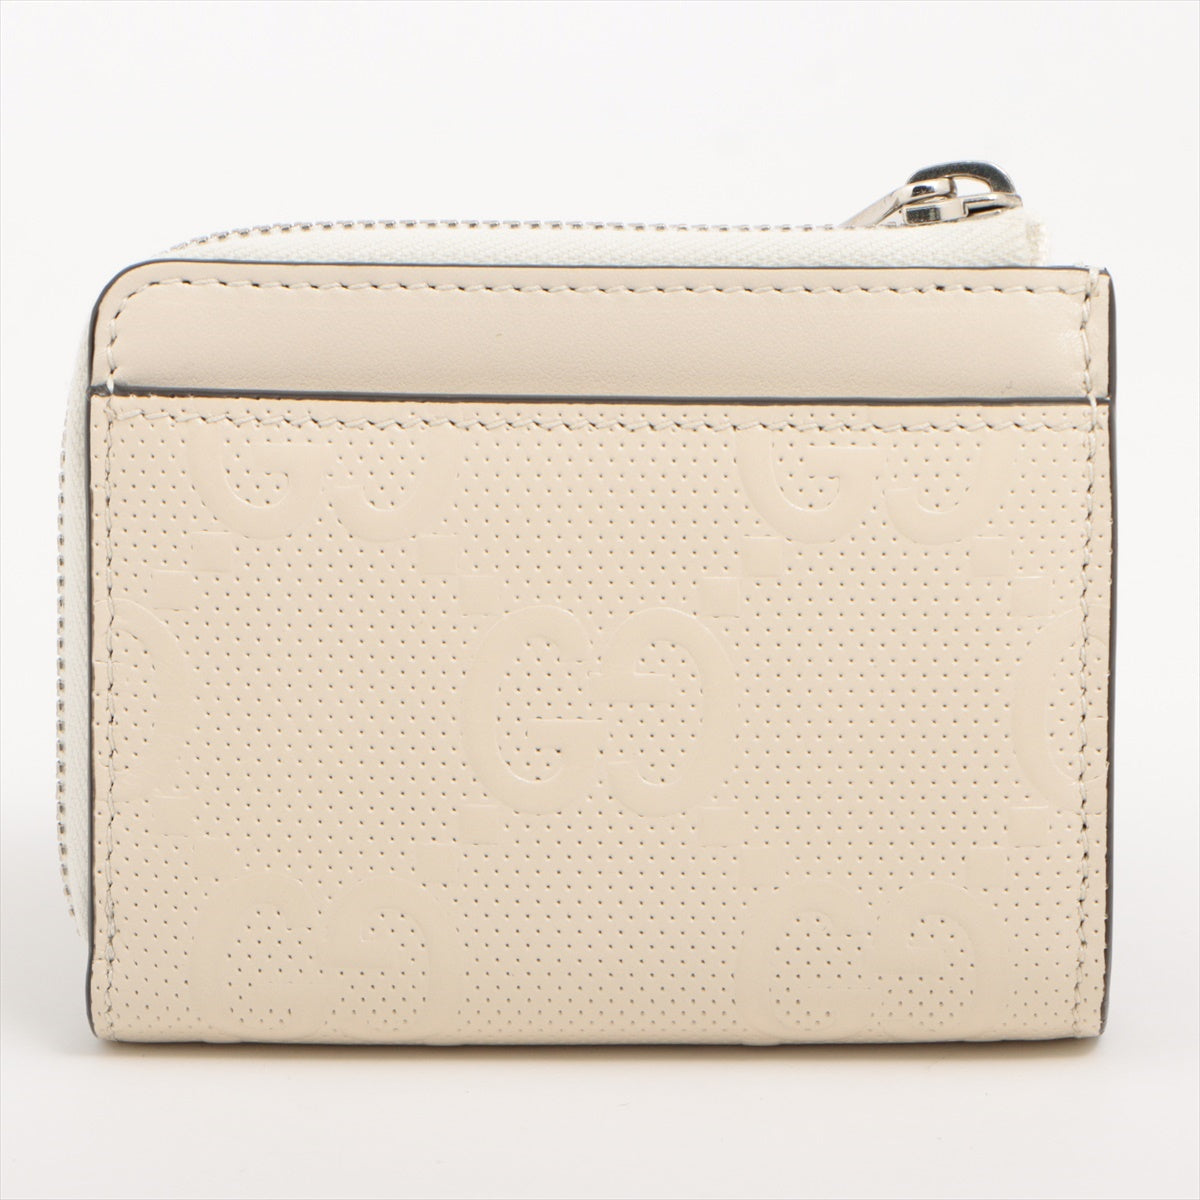 Gucci GG embossed 657571 Leather Coin purse White